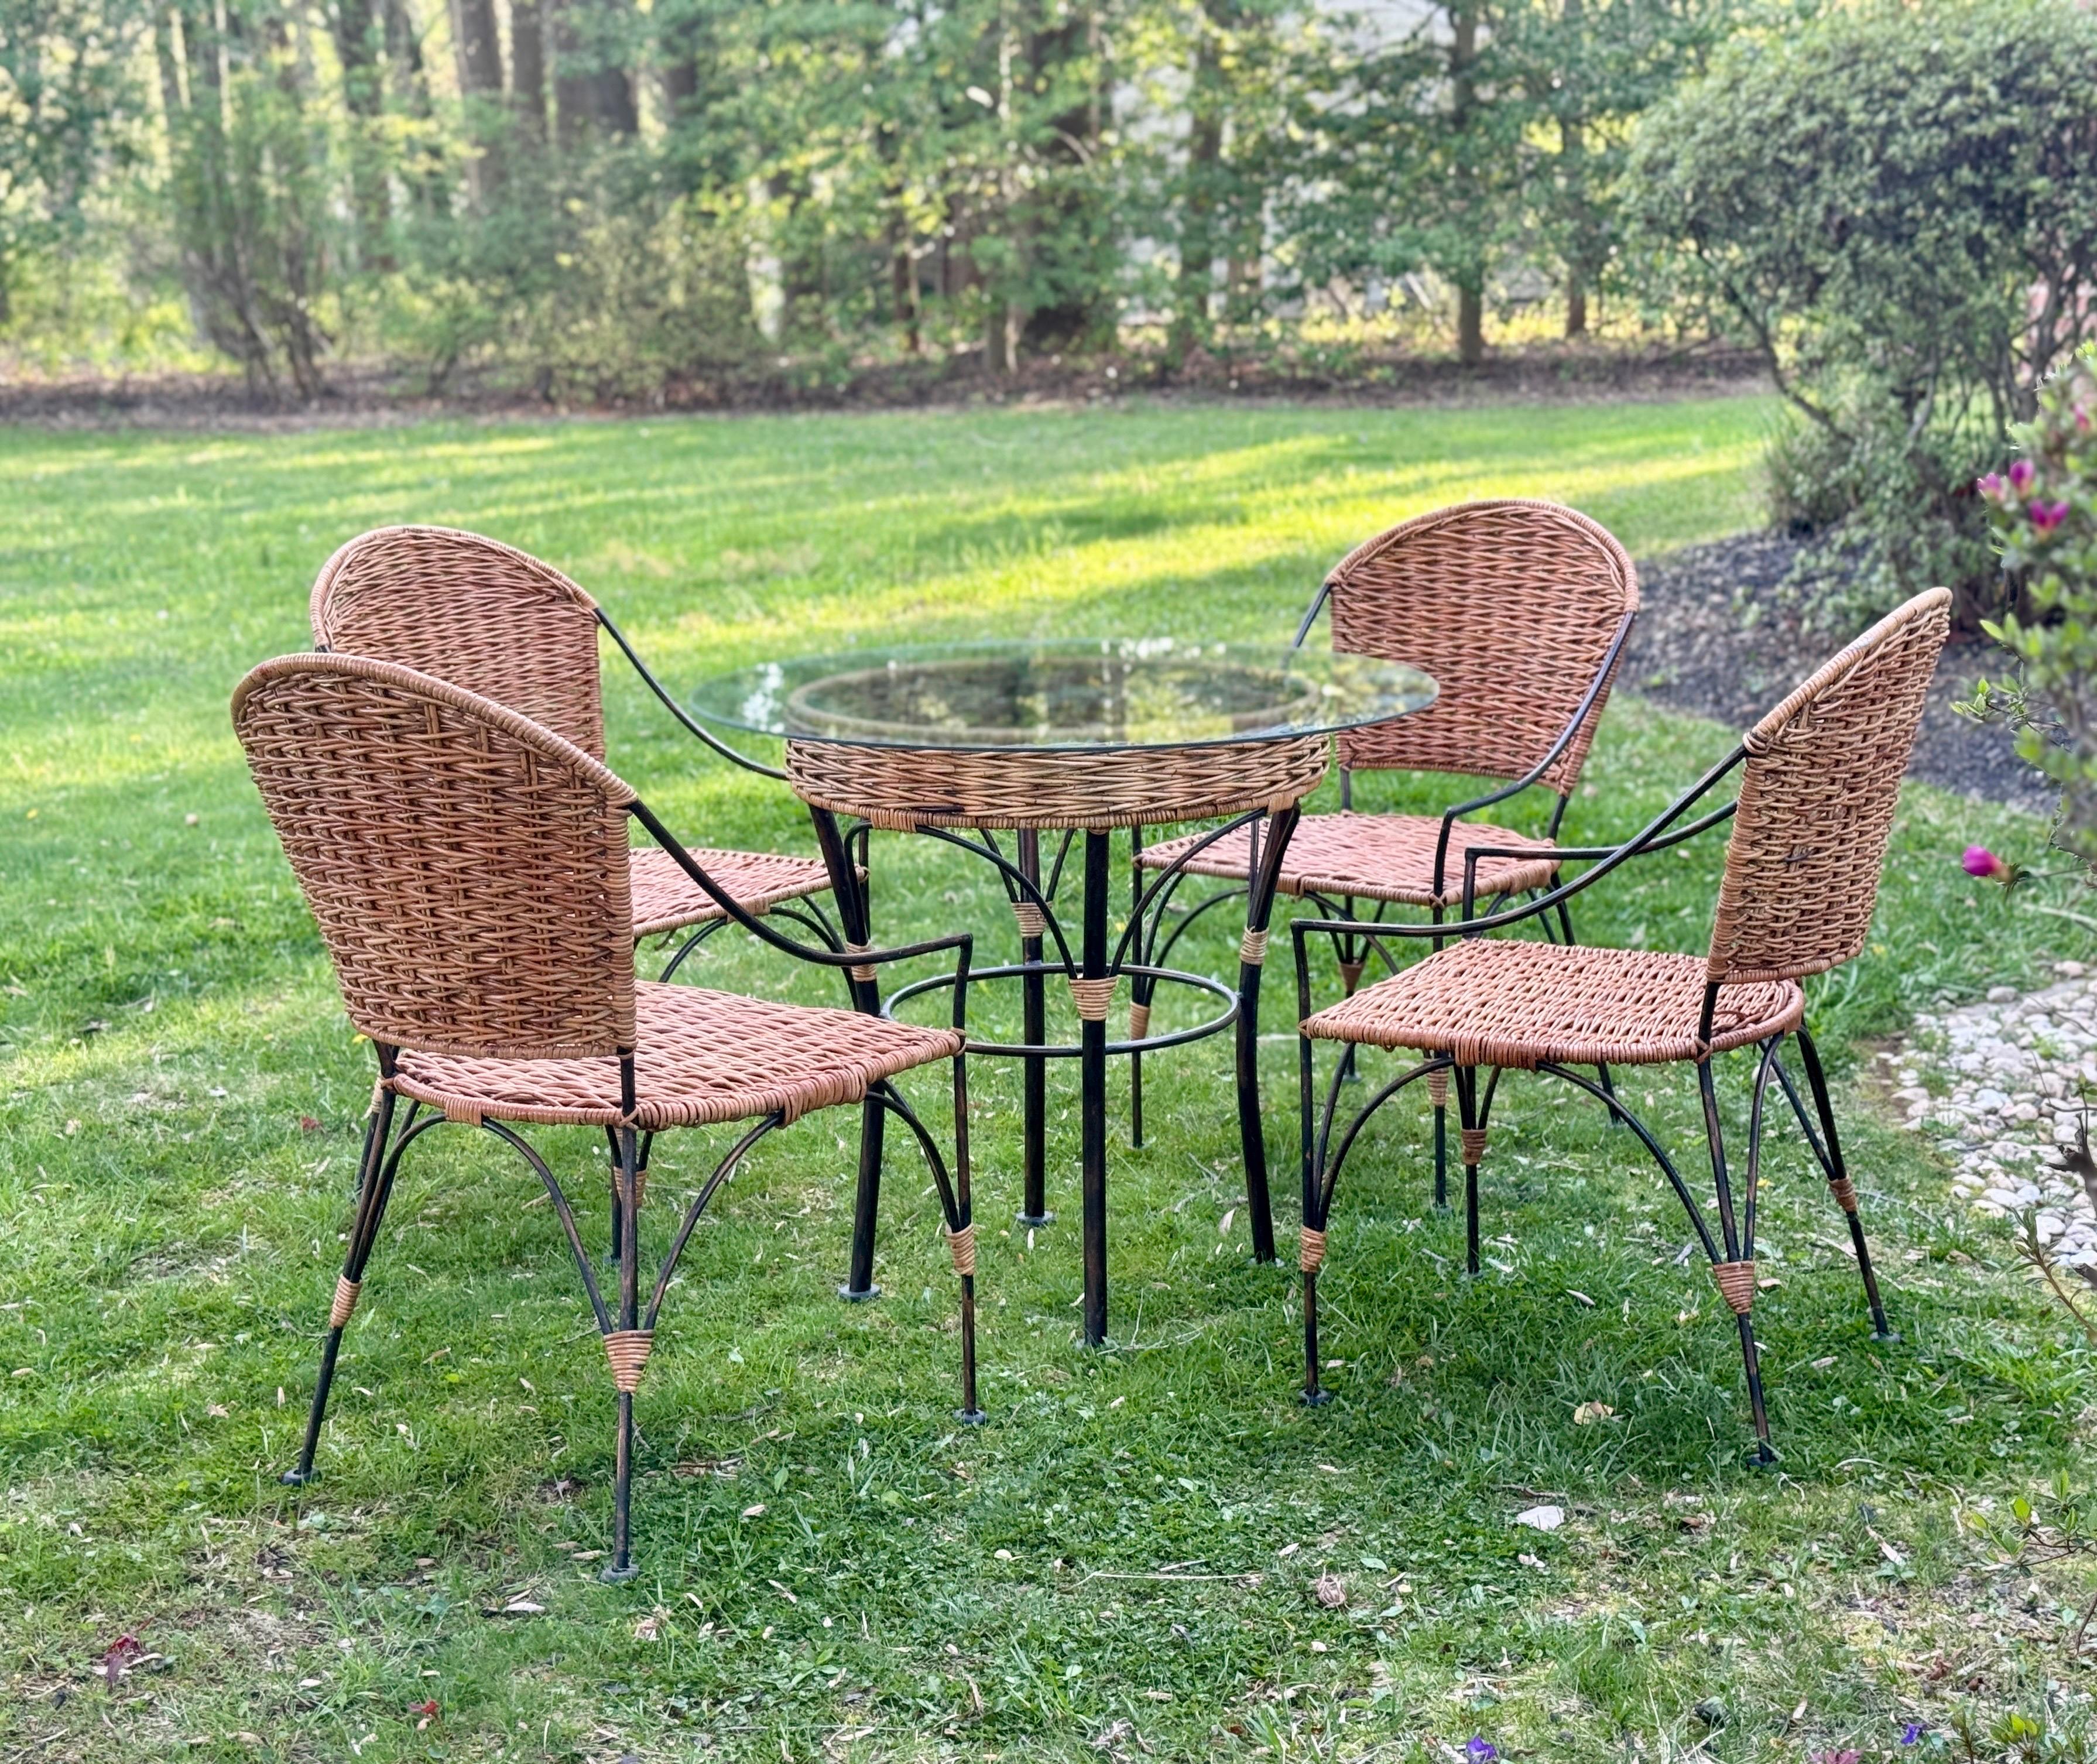 A stunning 5 piece wrought iron and wicker porch set.

Table Dimensions: 30.5 x 24

Chairs Dimensions: 36.5 x 20 x 24

